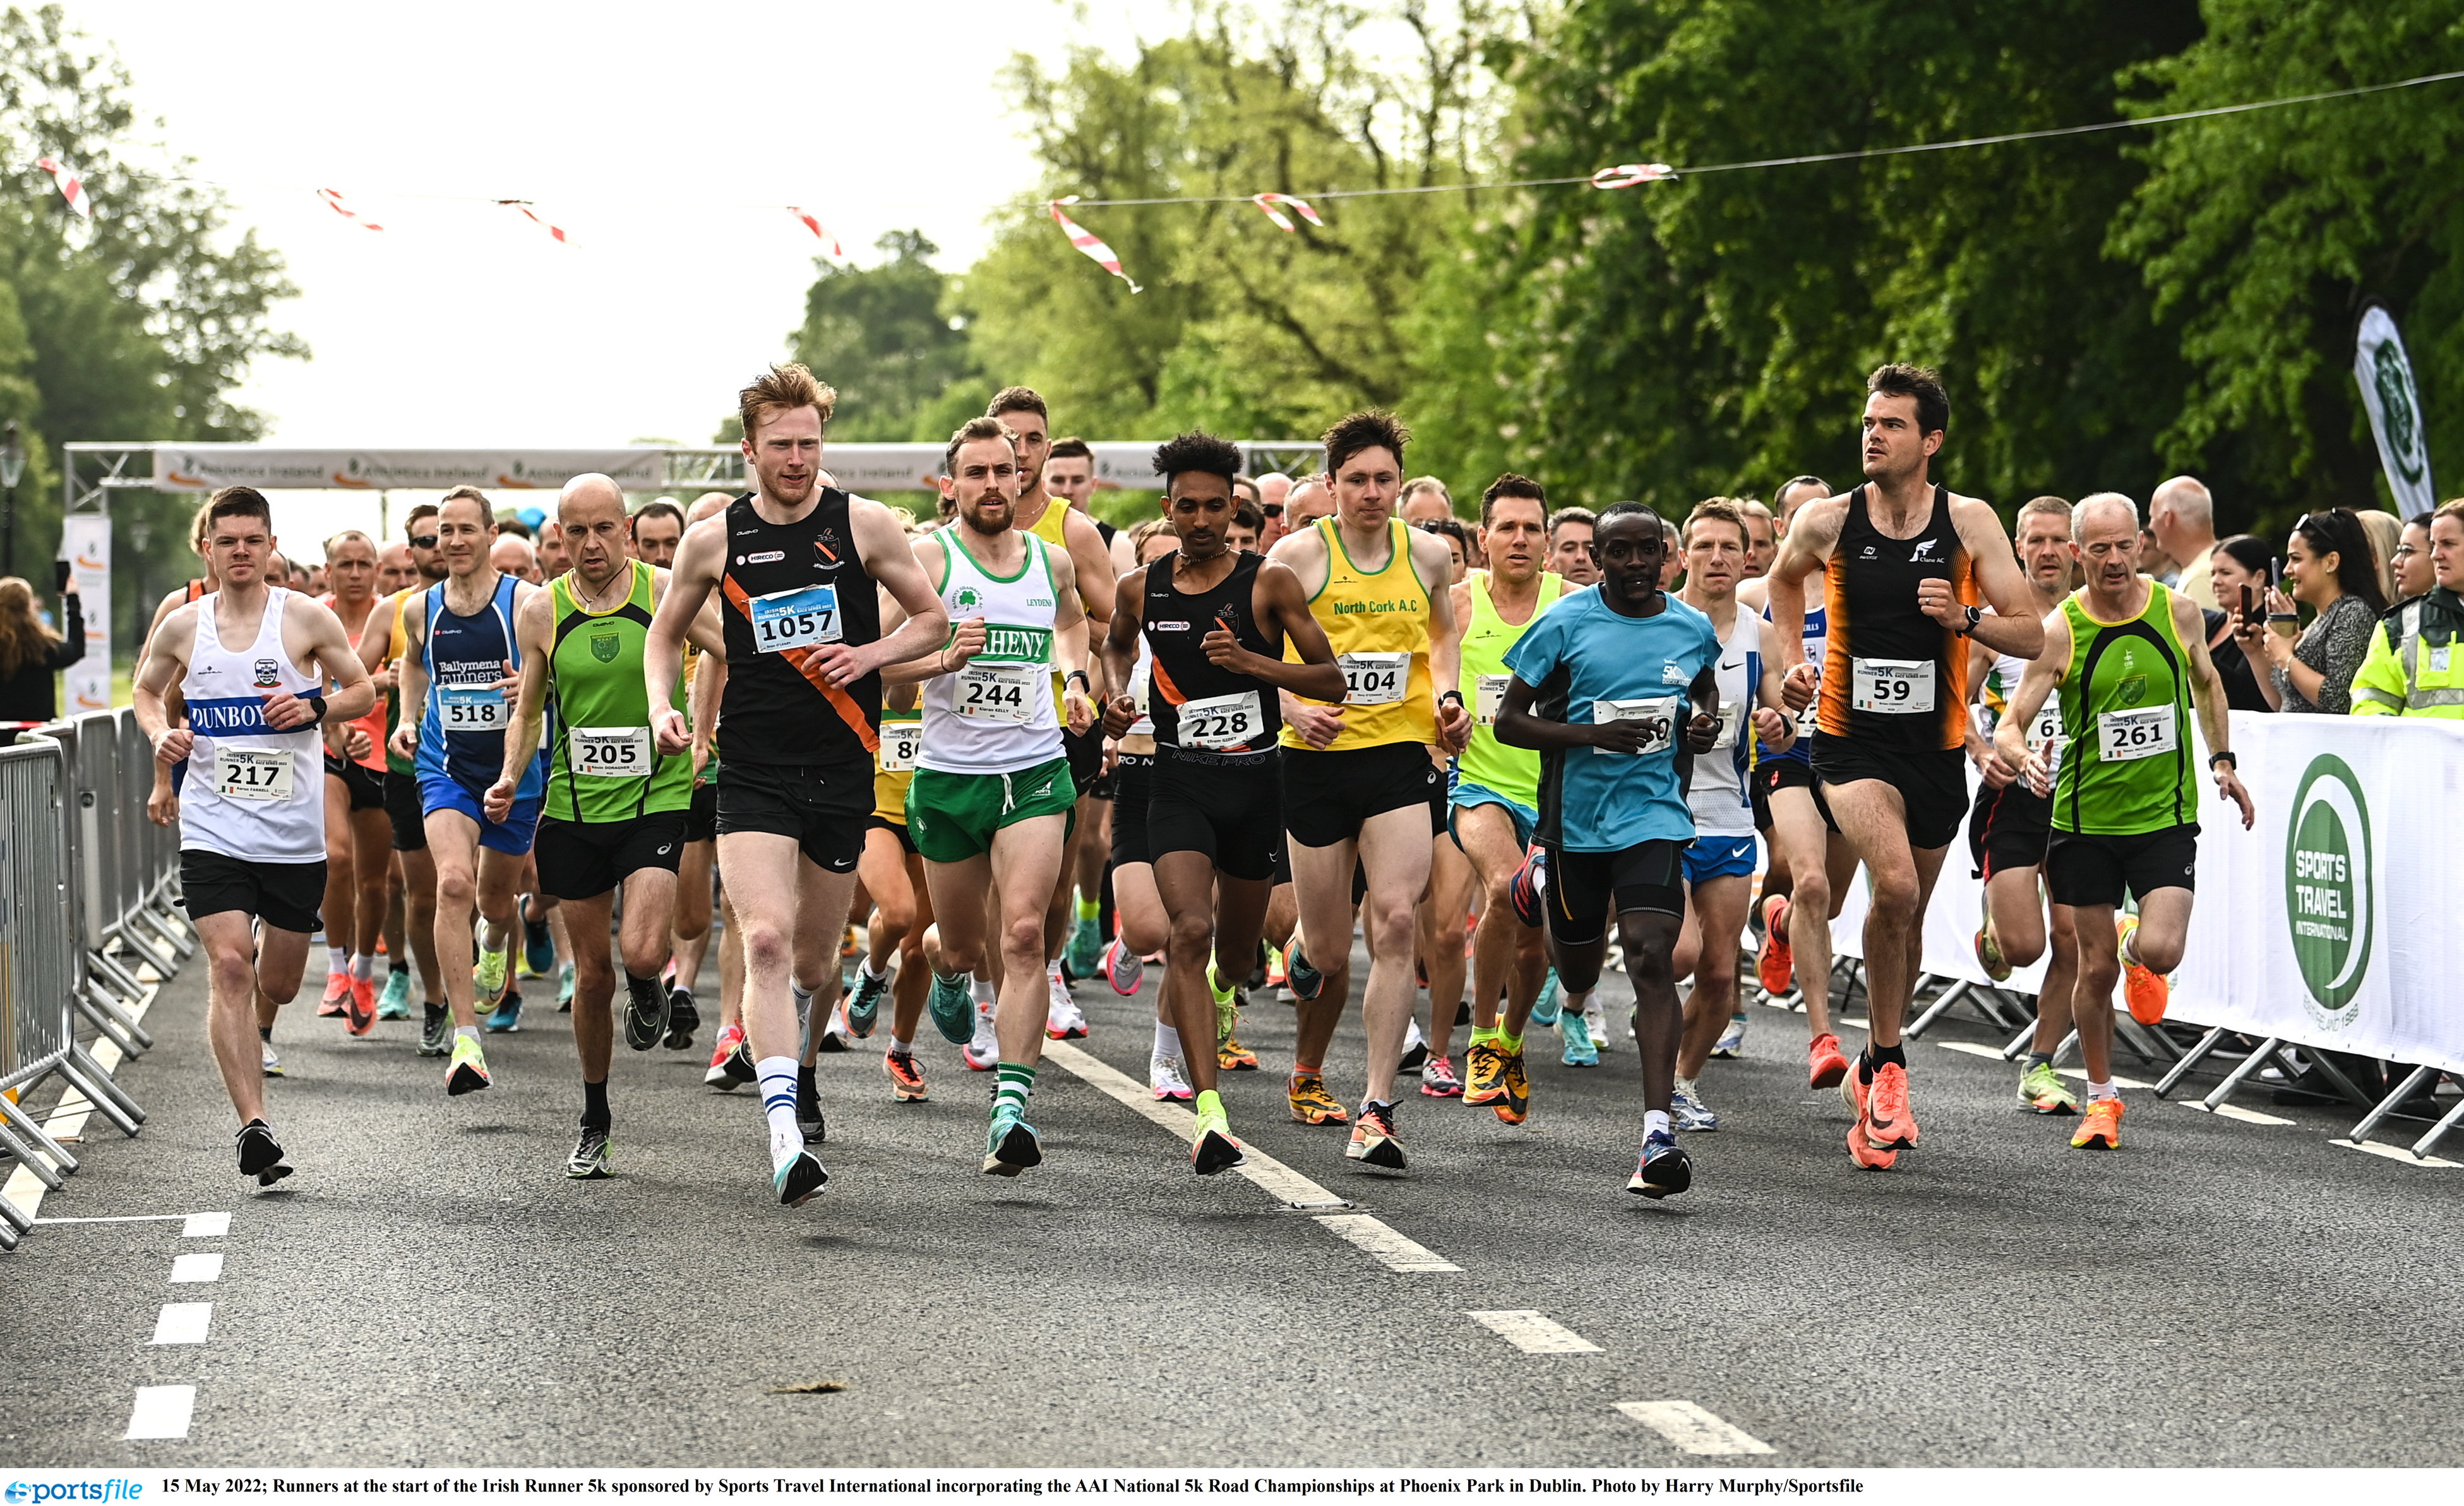 NATIONAL 5K TITLES UP FOR GRABS IN THE PHOENIX PARK